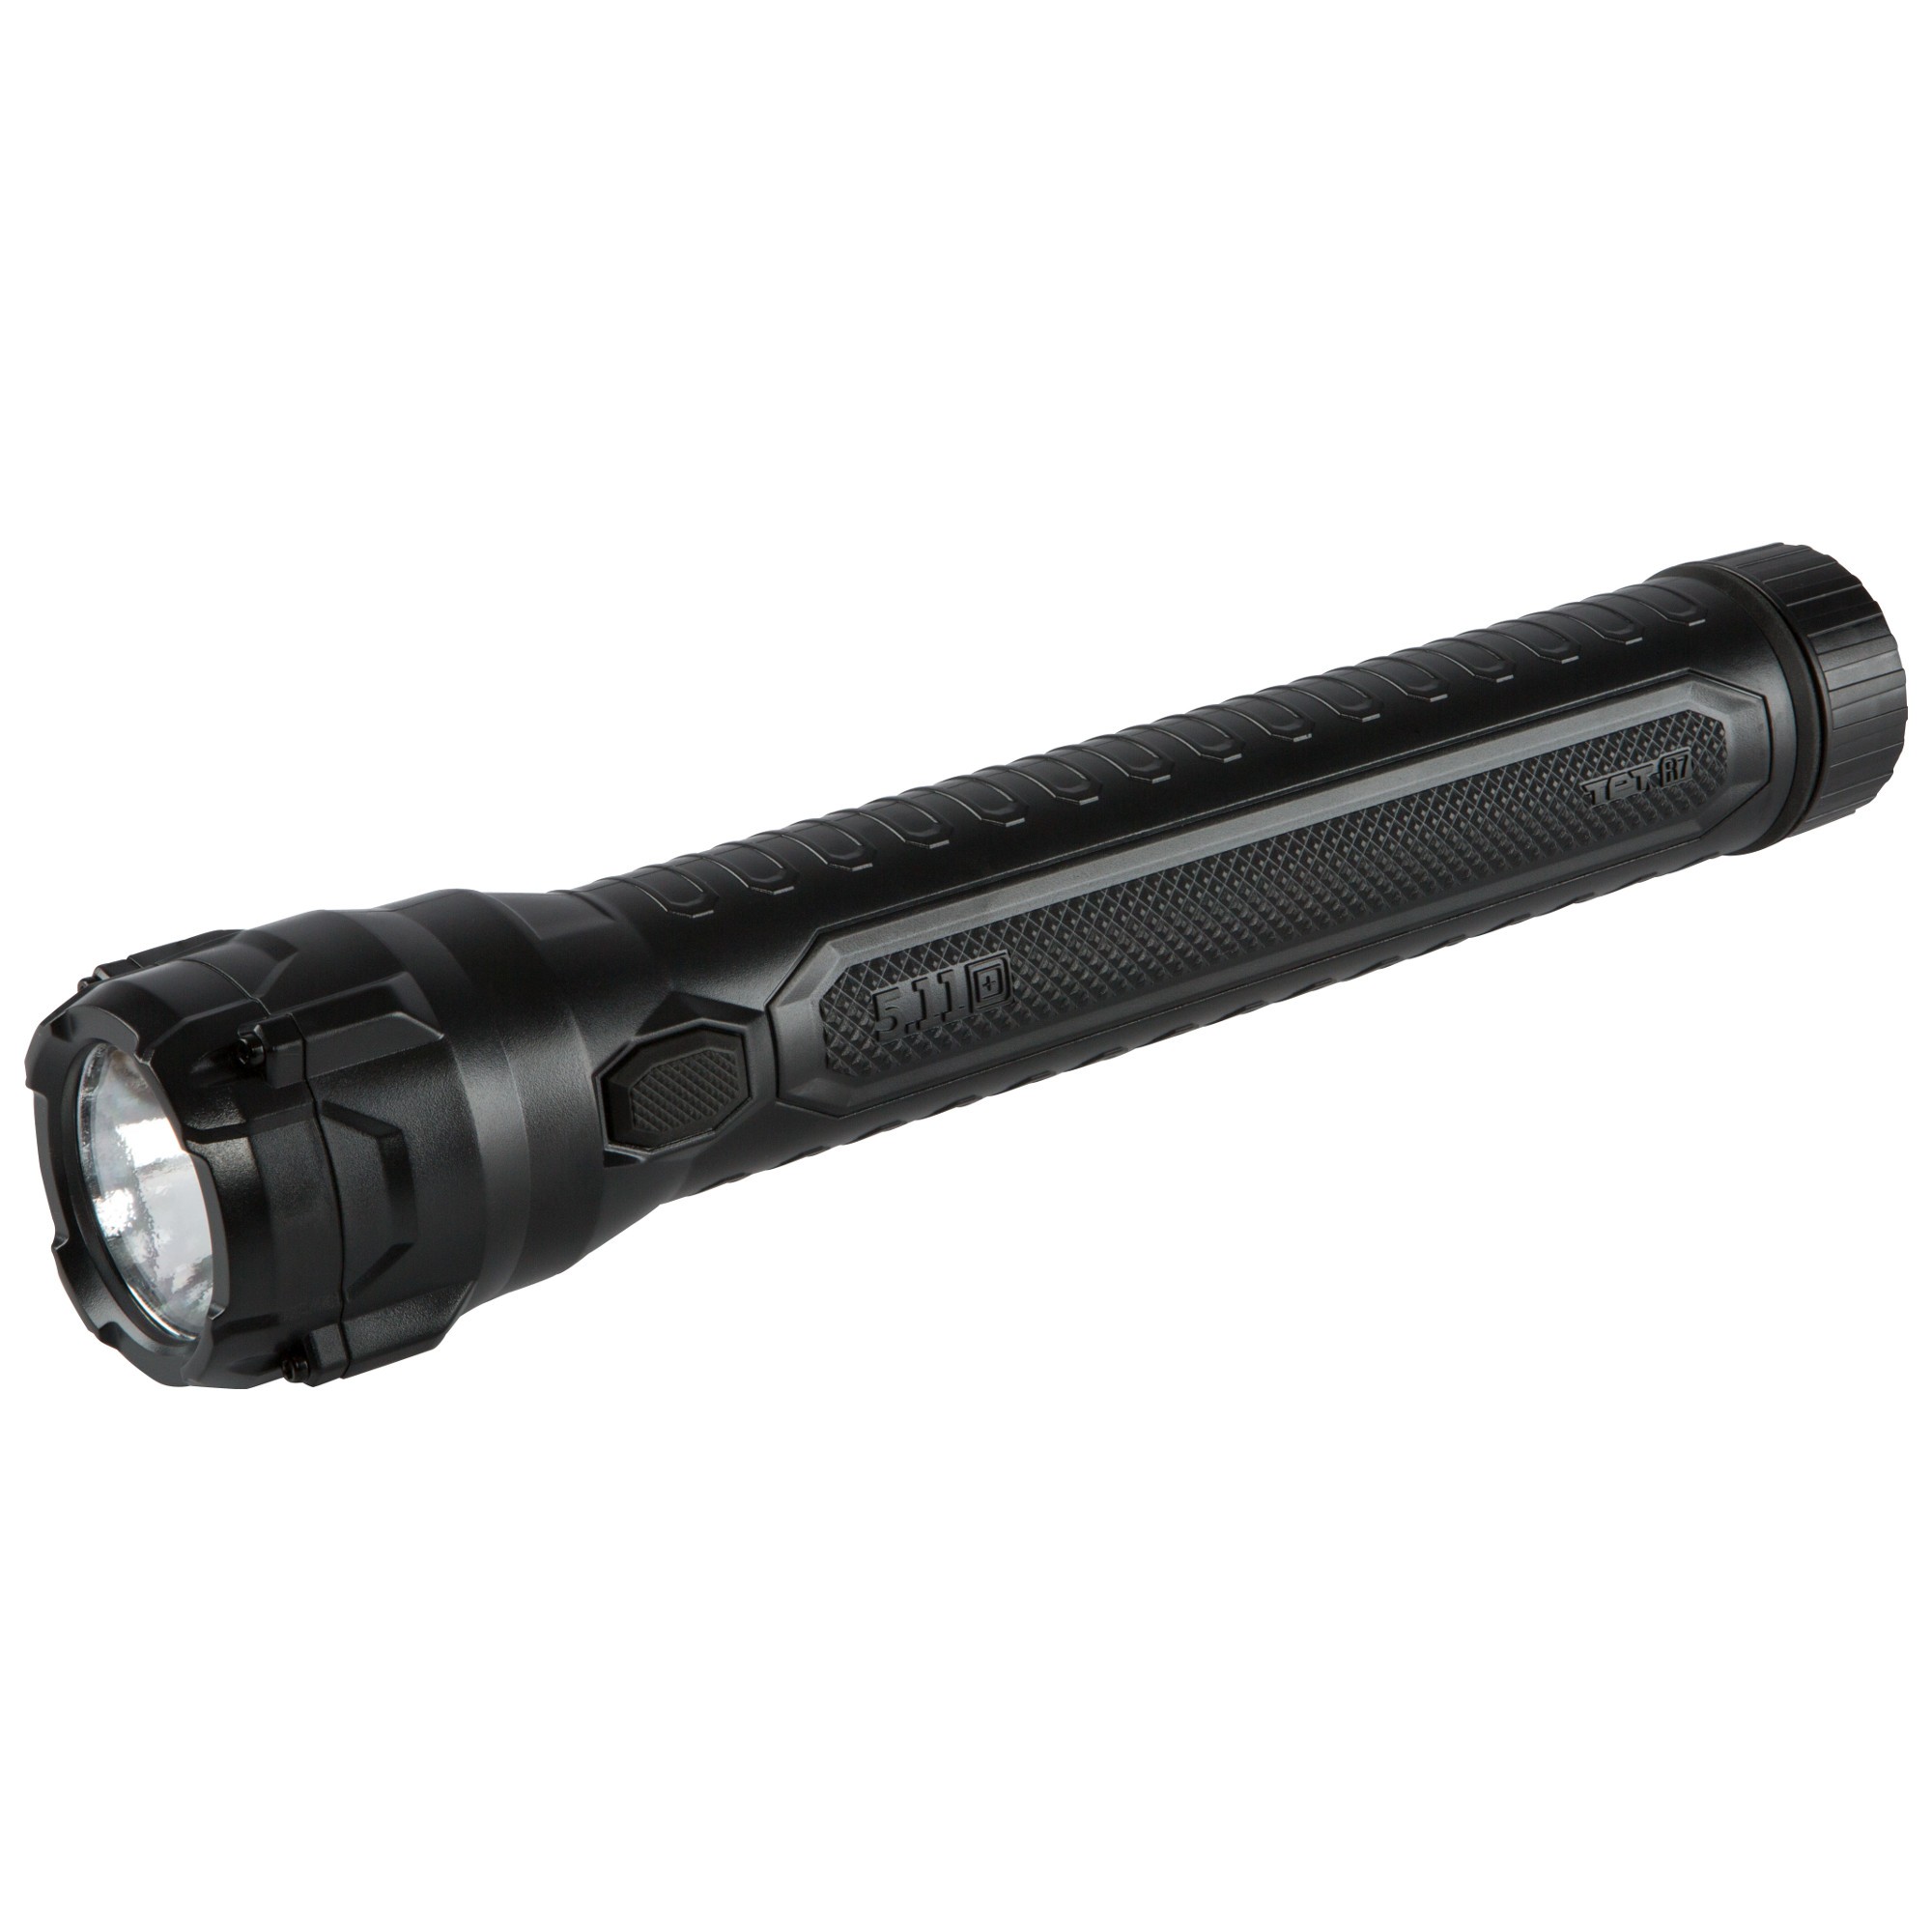 Buy the Brightest Cree LED Rechargable Flashlights | 5.11 Tactical